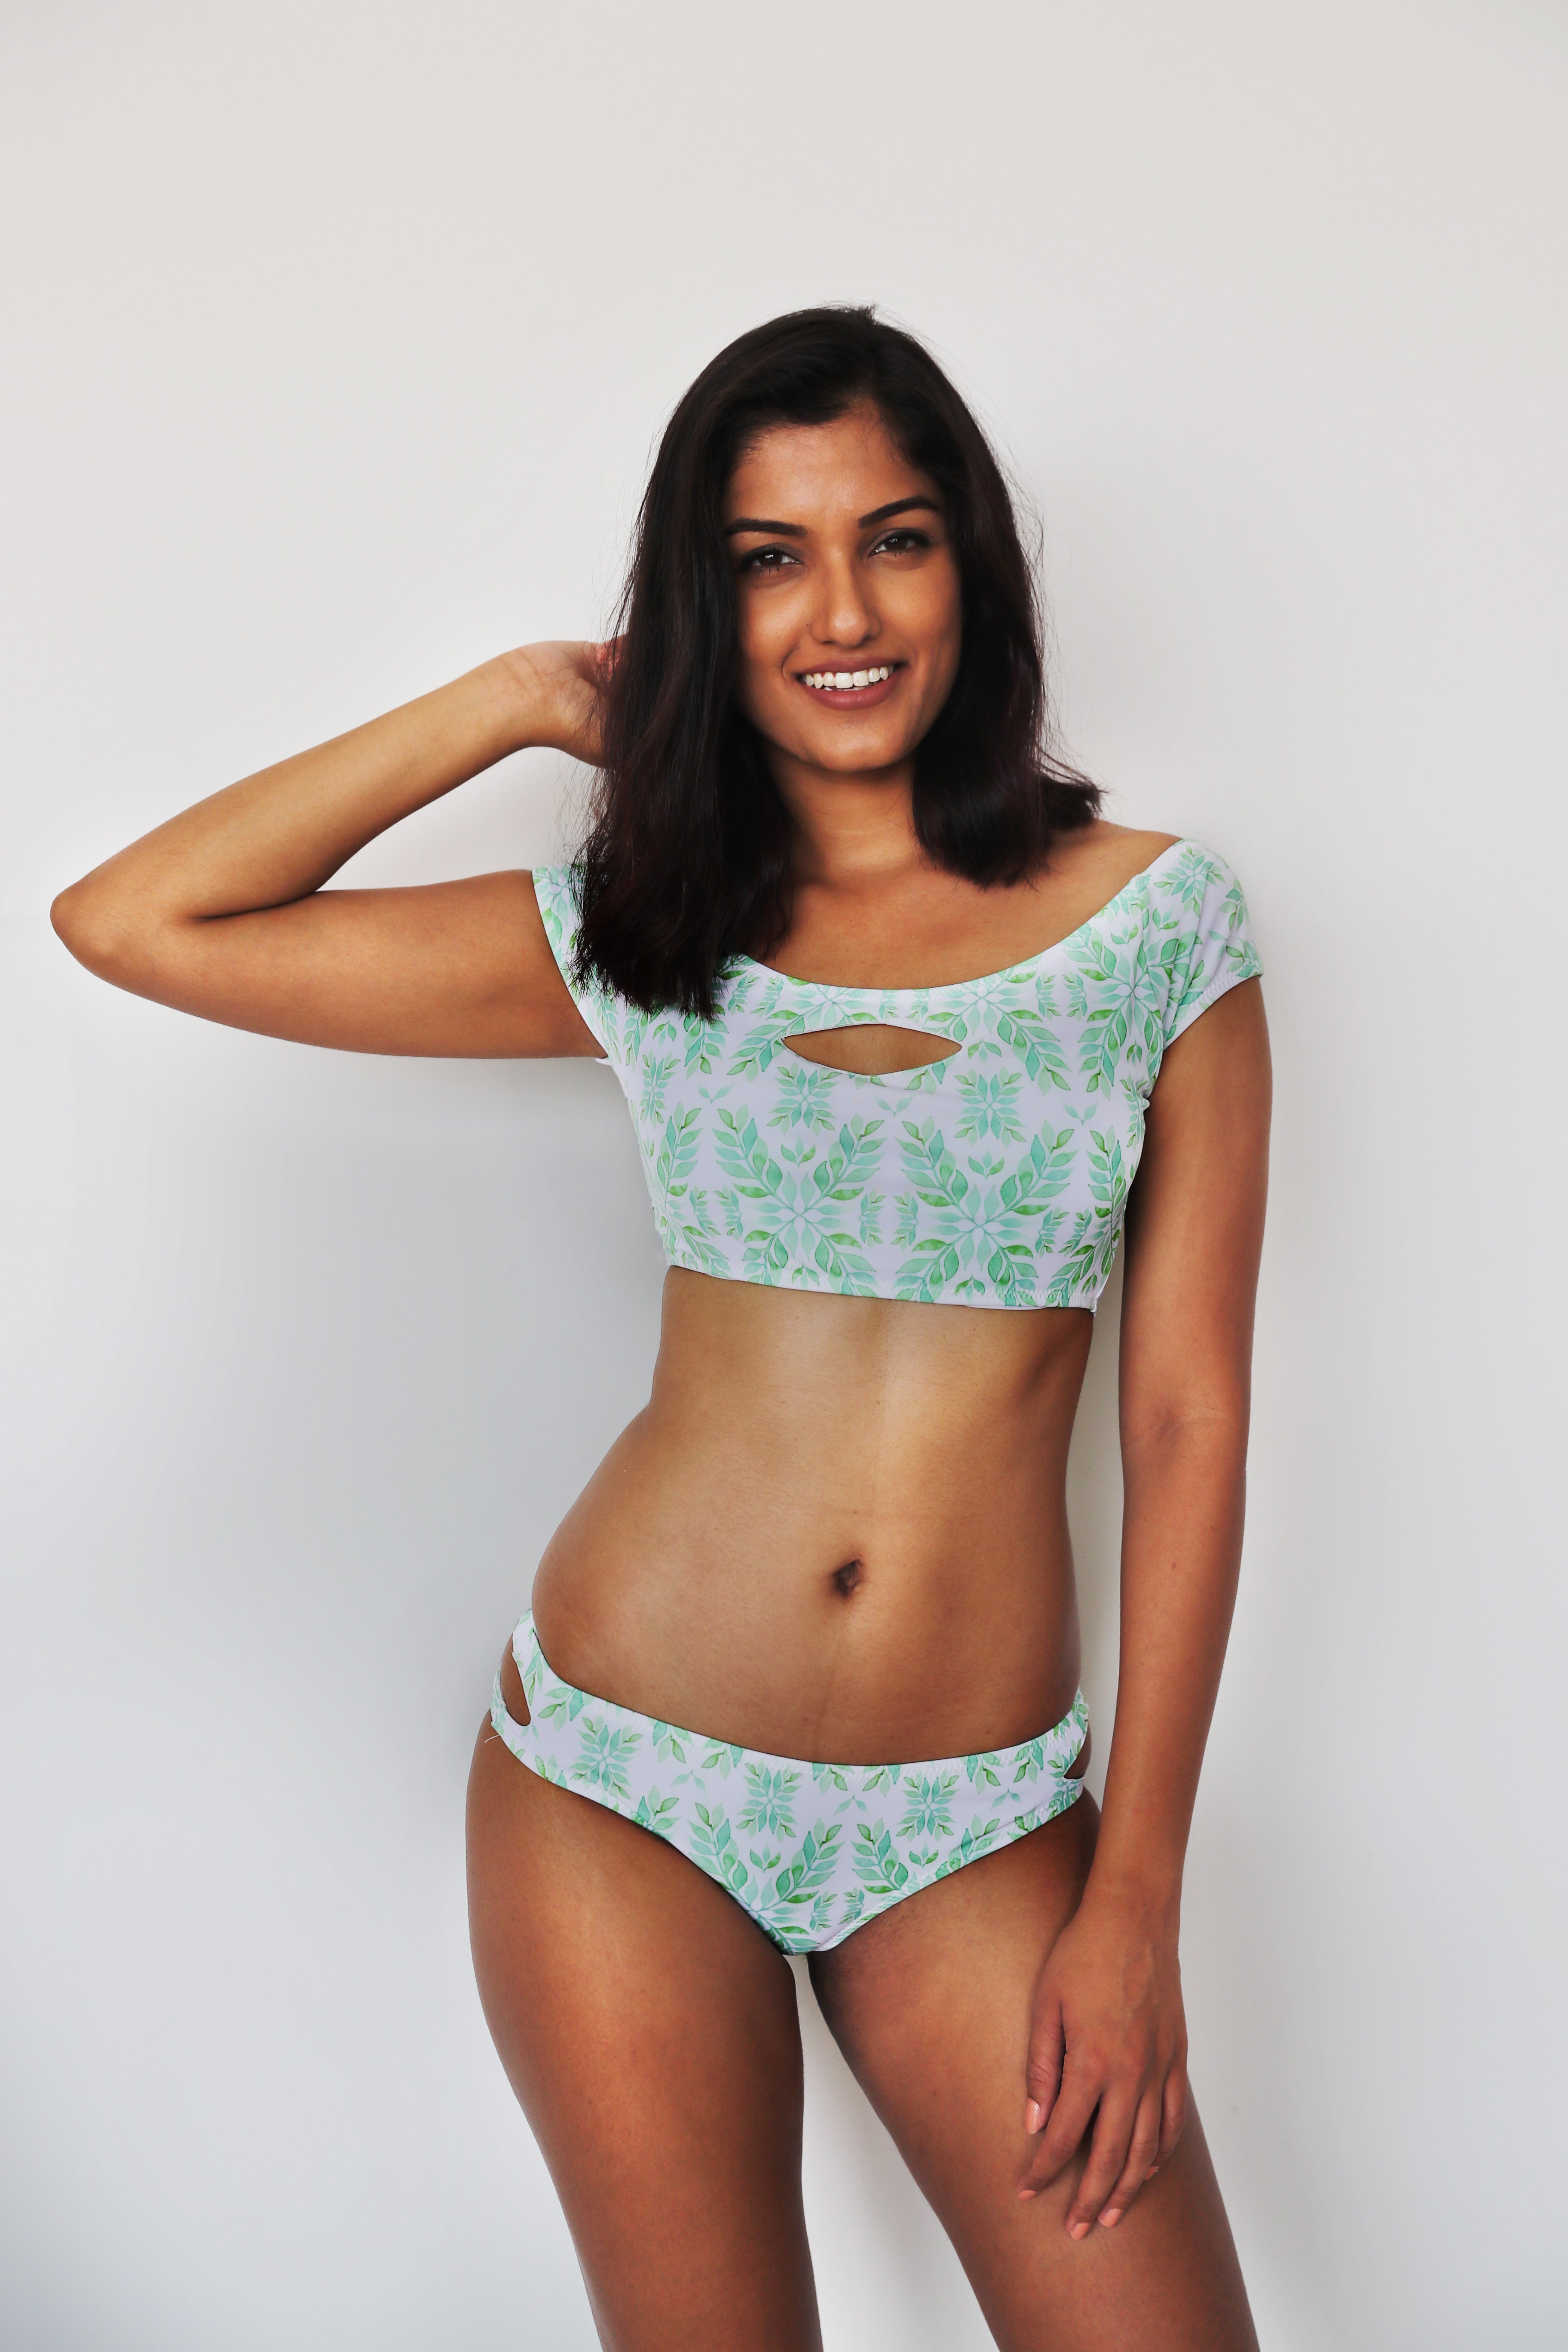 woman wearing a two piece bikini set with a green leaf print on a white background.